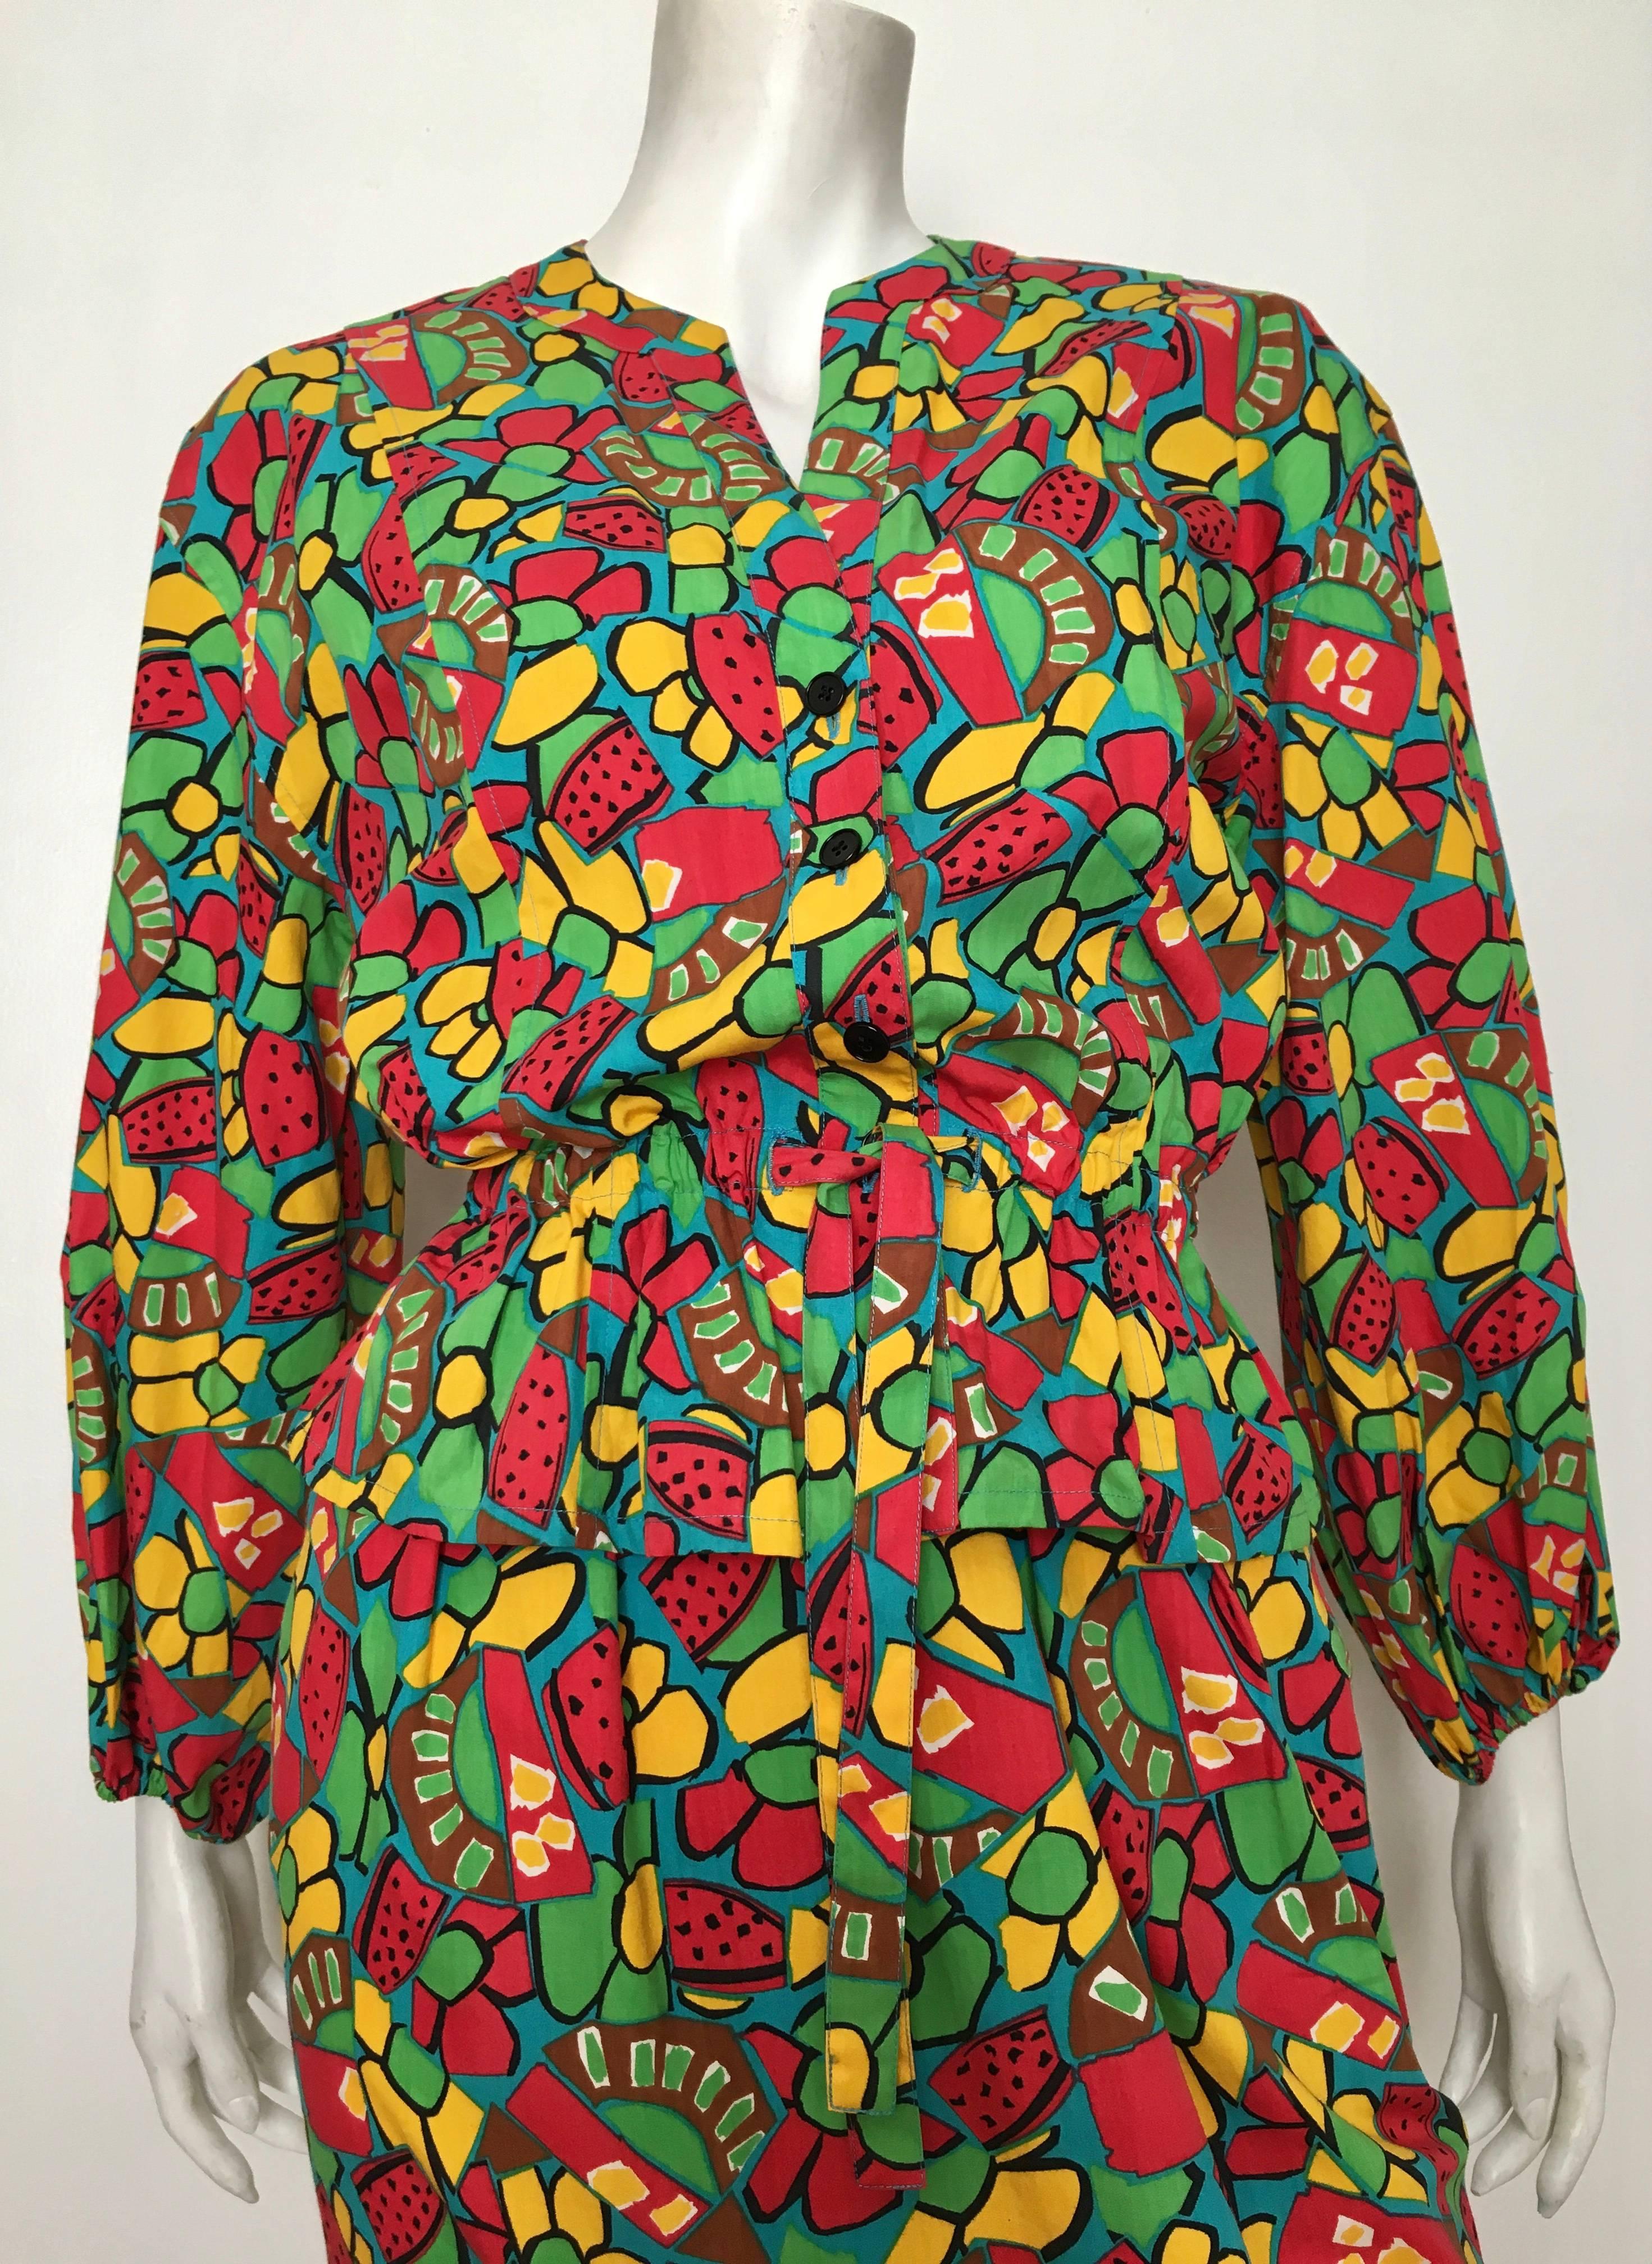 Guy Laroche 1980s cotton sleeveless dress & matching jacket is a French size 38 and fits like an USA size 6.  Ladies please grab your tape measure so you can measure your bust, waist, hips and sleeves length to make certain this lovely vintage